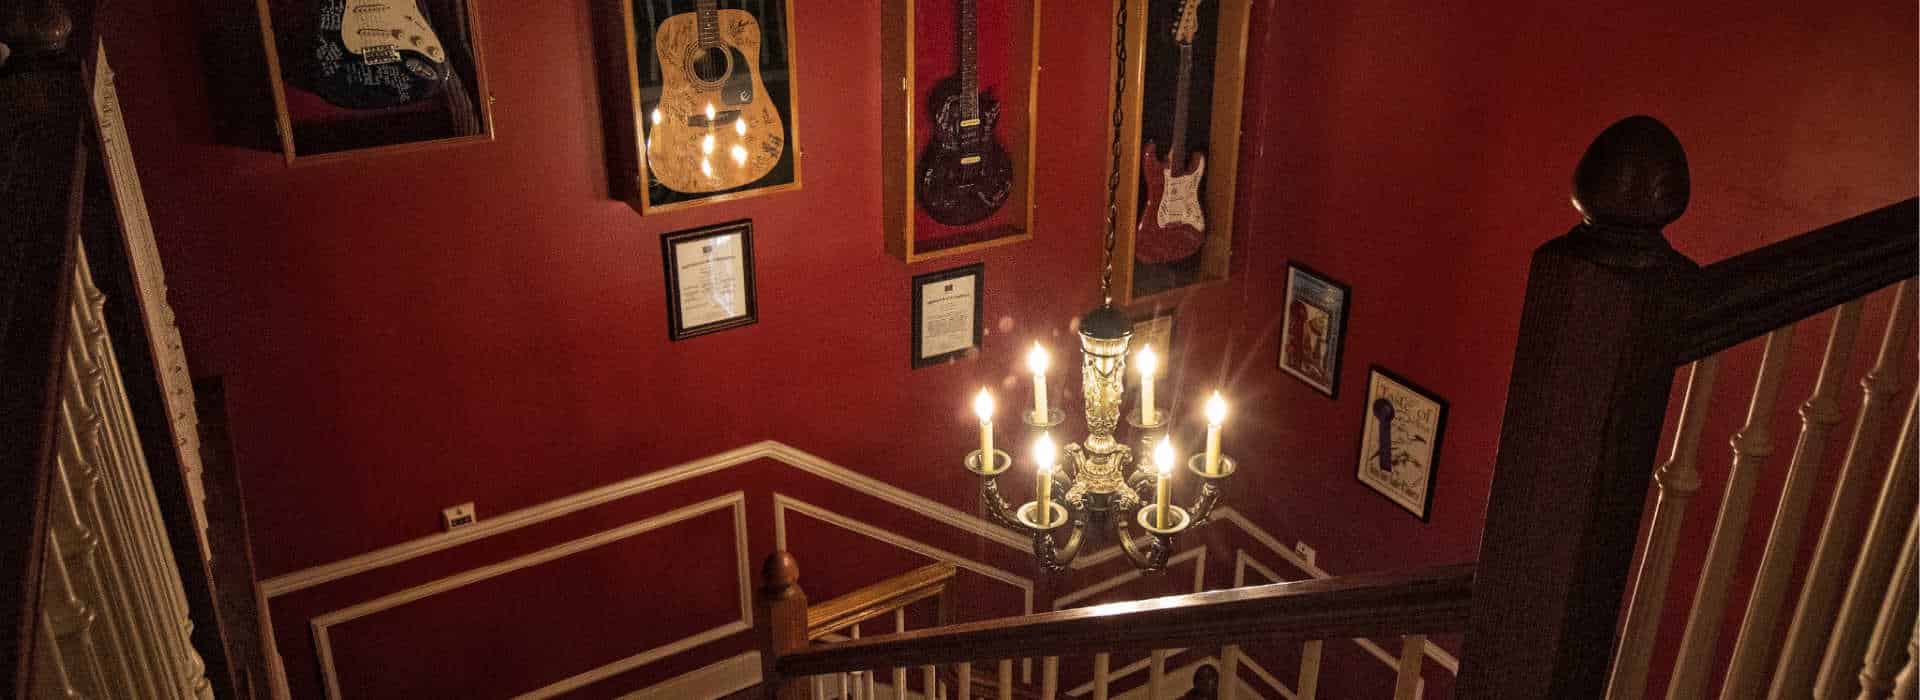 guitars on the wall with a lighted chandelier in the foreground